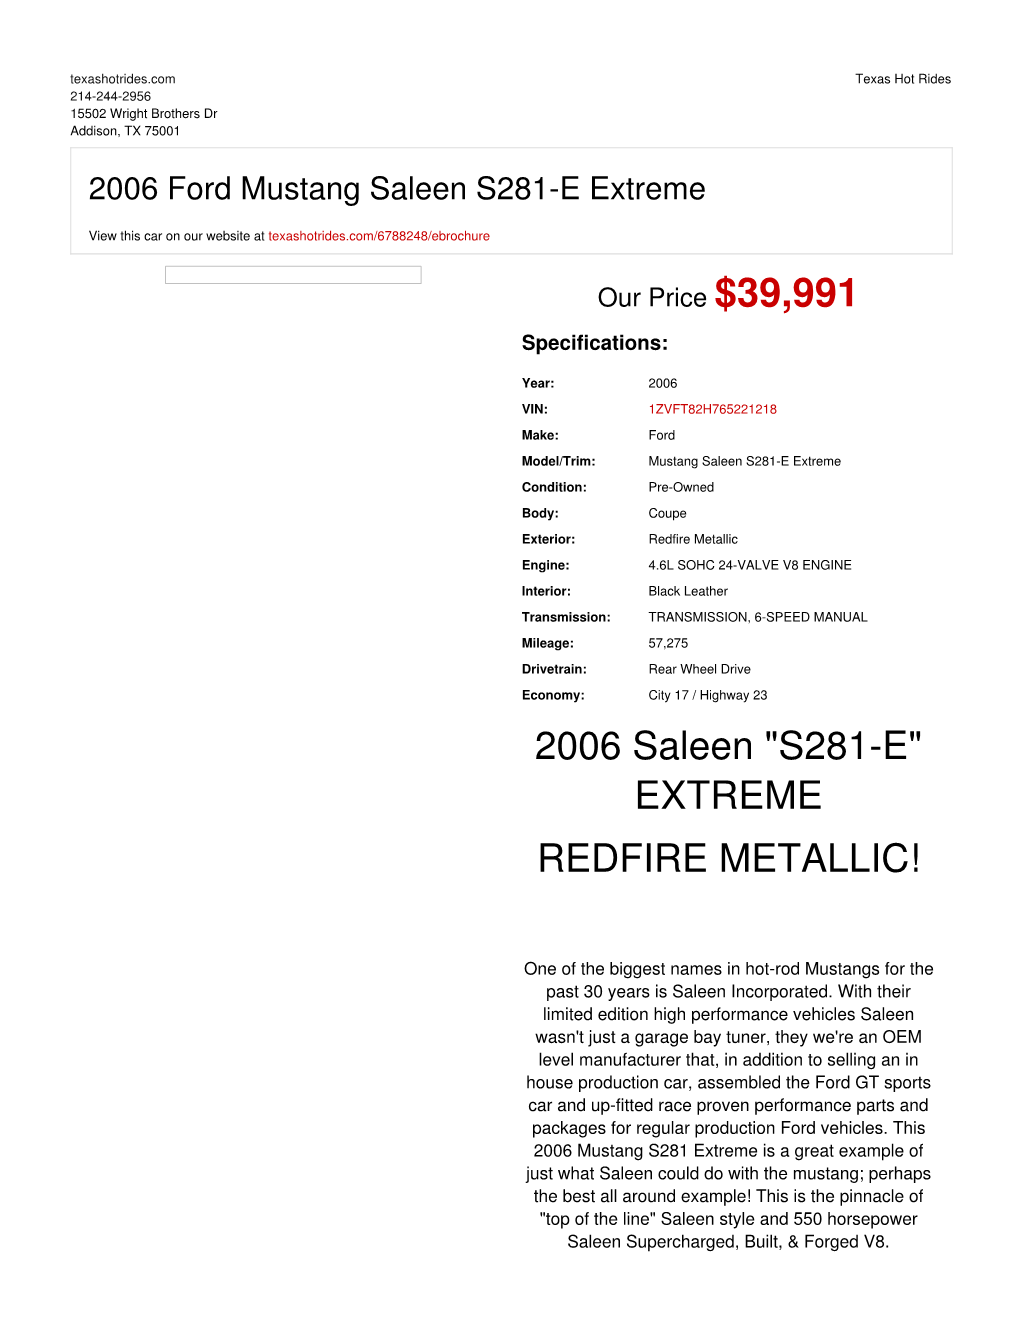 2006 Ford Mustang Saleen S281-E Extreme | Addison, TX | Texas Hot